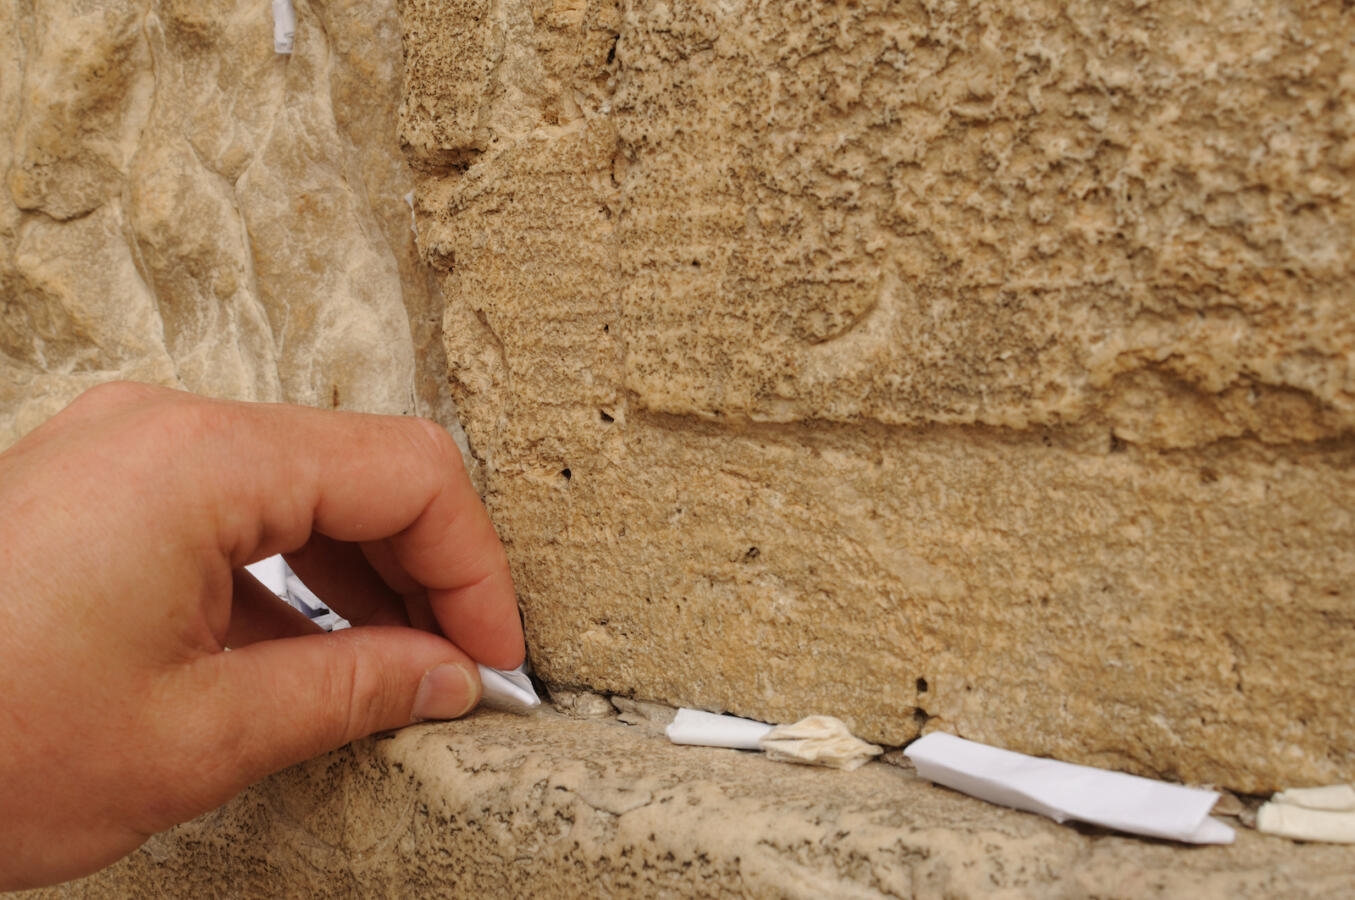 Asking for desire at the Western Wall